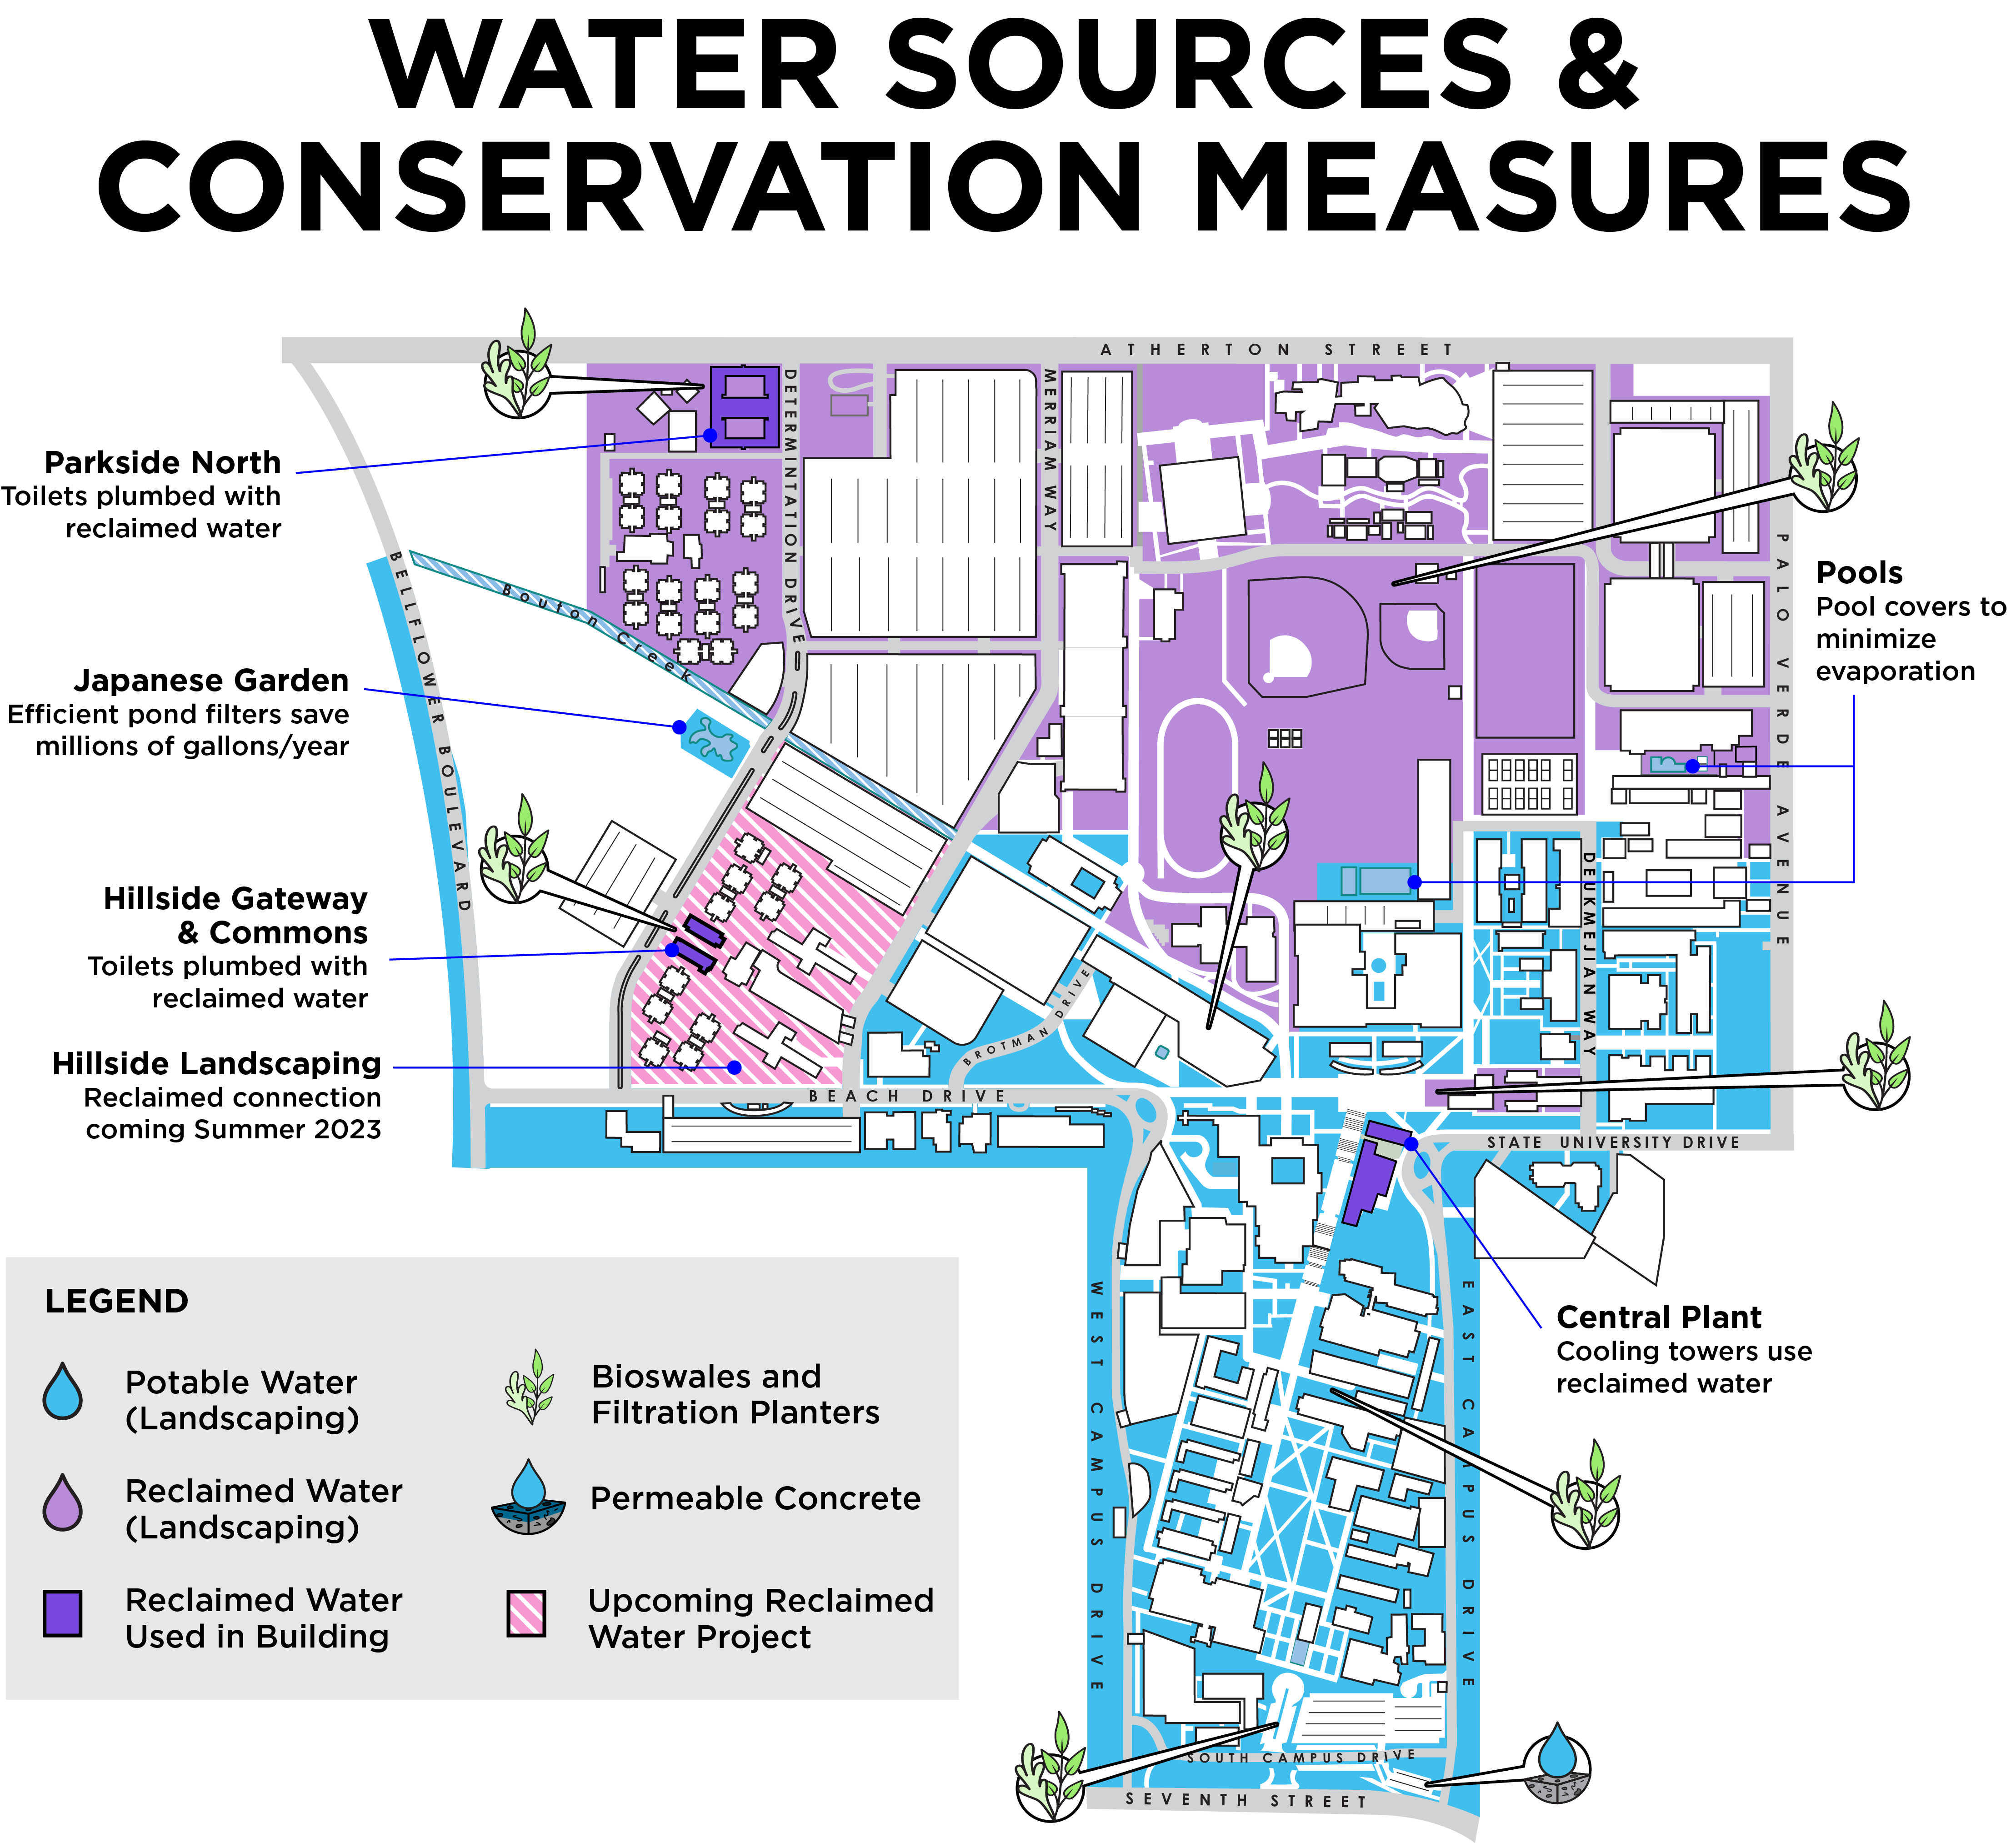 Map showing water sources and conservation measures on campus